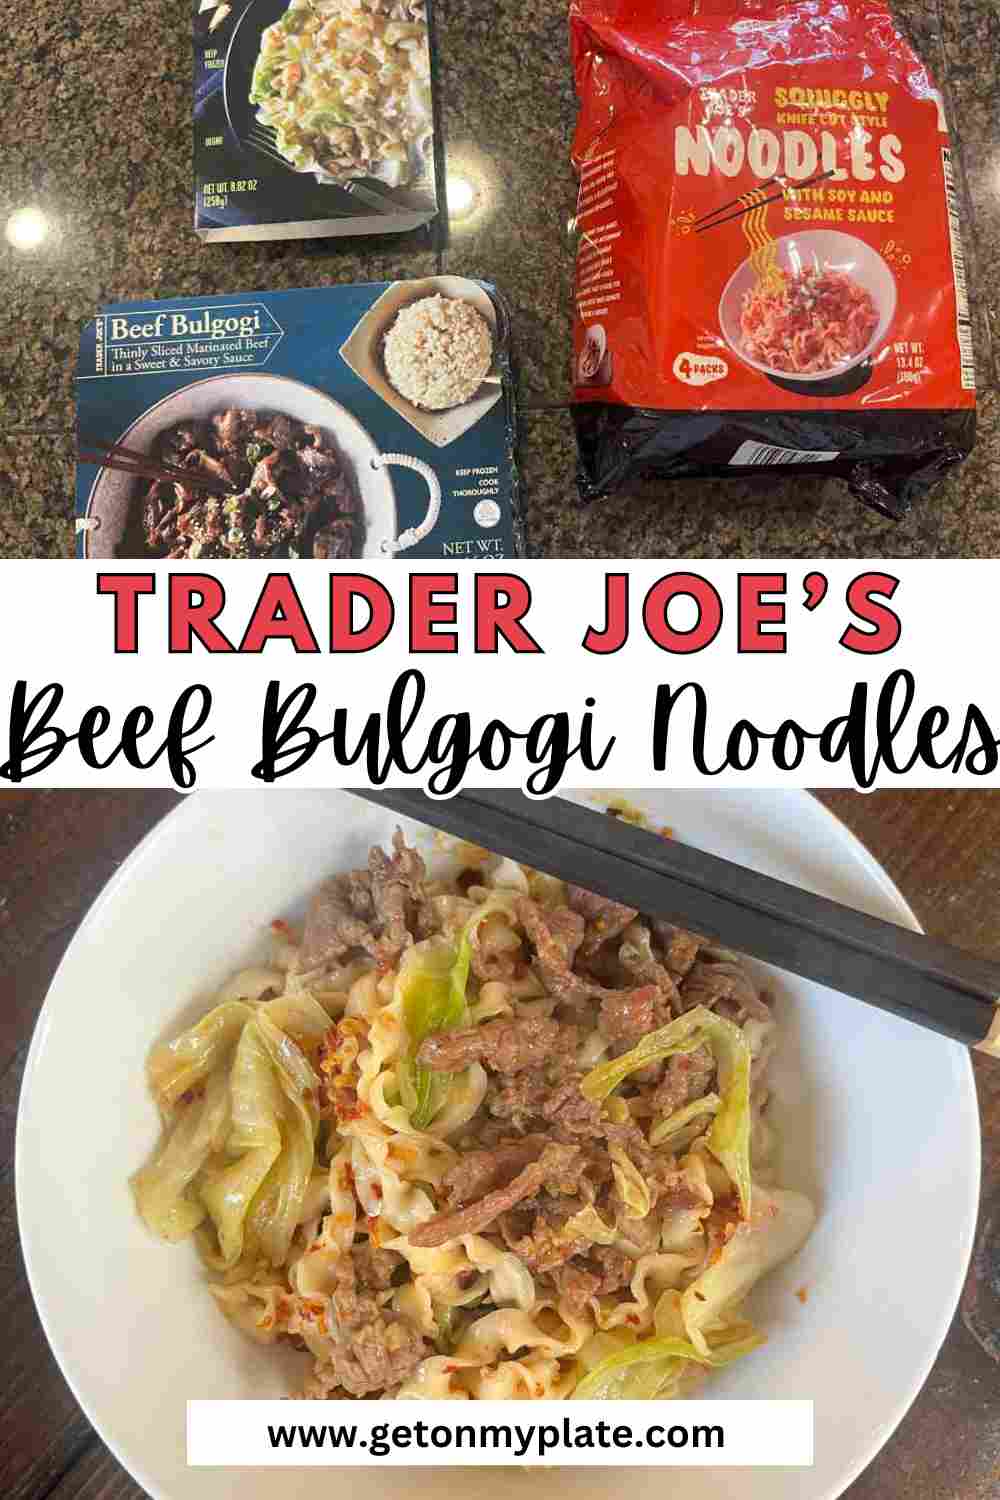 Pinerest Pin for Trader joe's beef bulgogi stir fry showing ingredients and the finished stir fry dish.